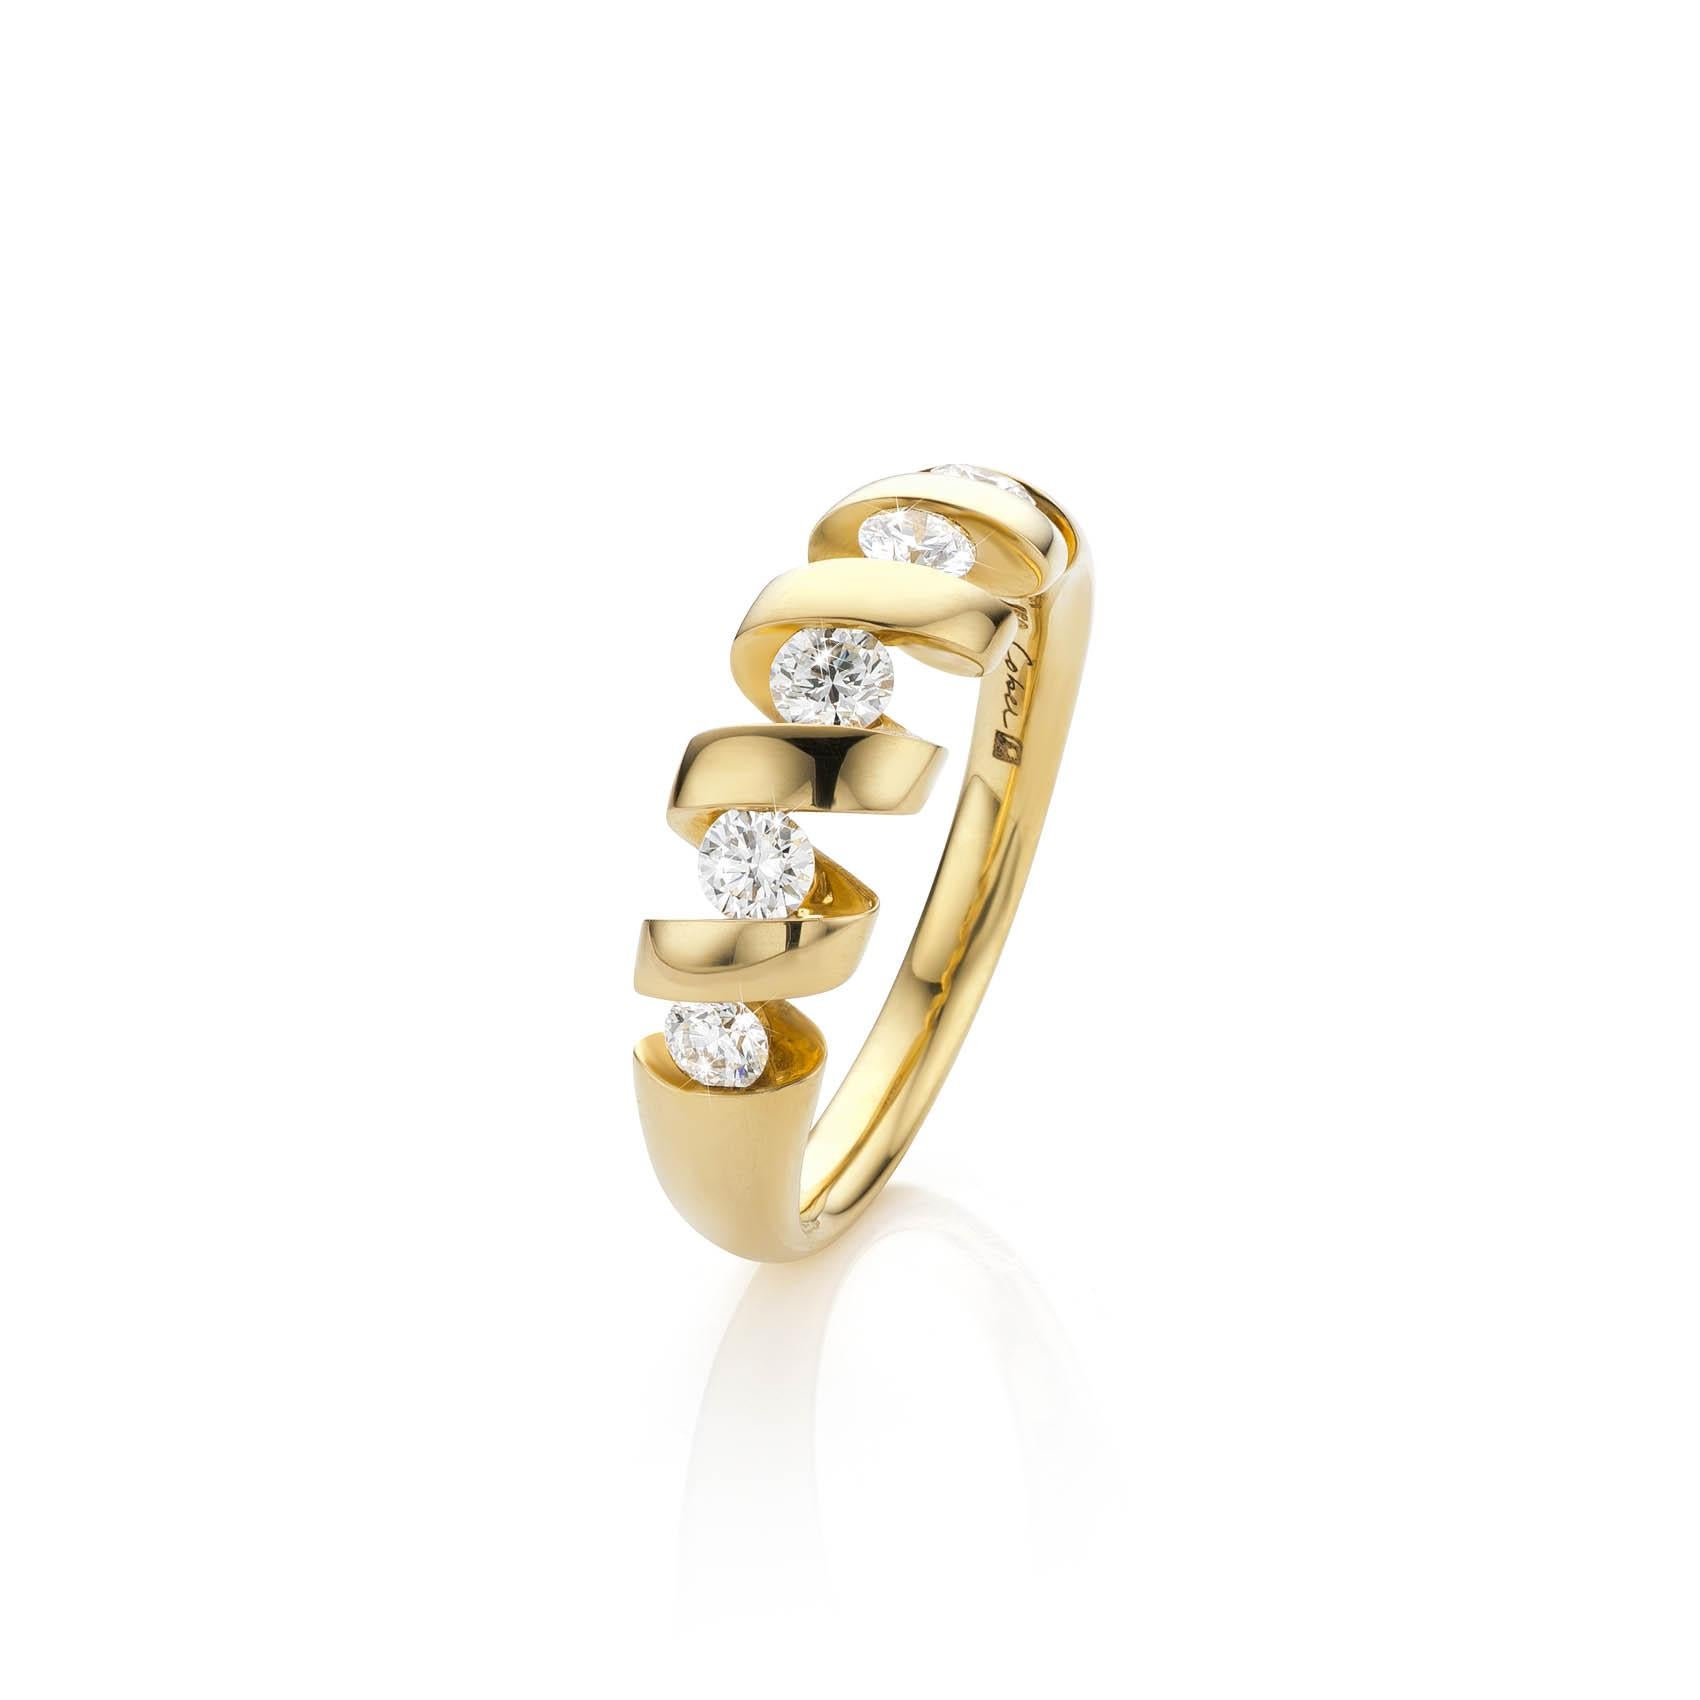 Contemporary Cober “Spiral” with 5 Brilliant-cut Diamonds from 0.51 Carat in total Ring For Sale